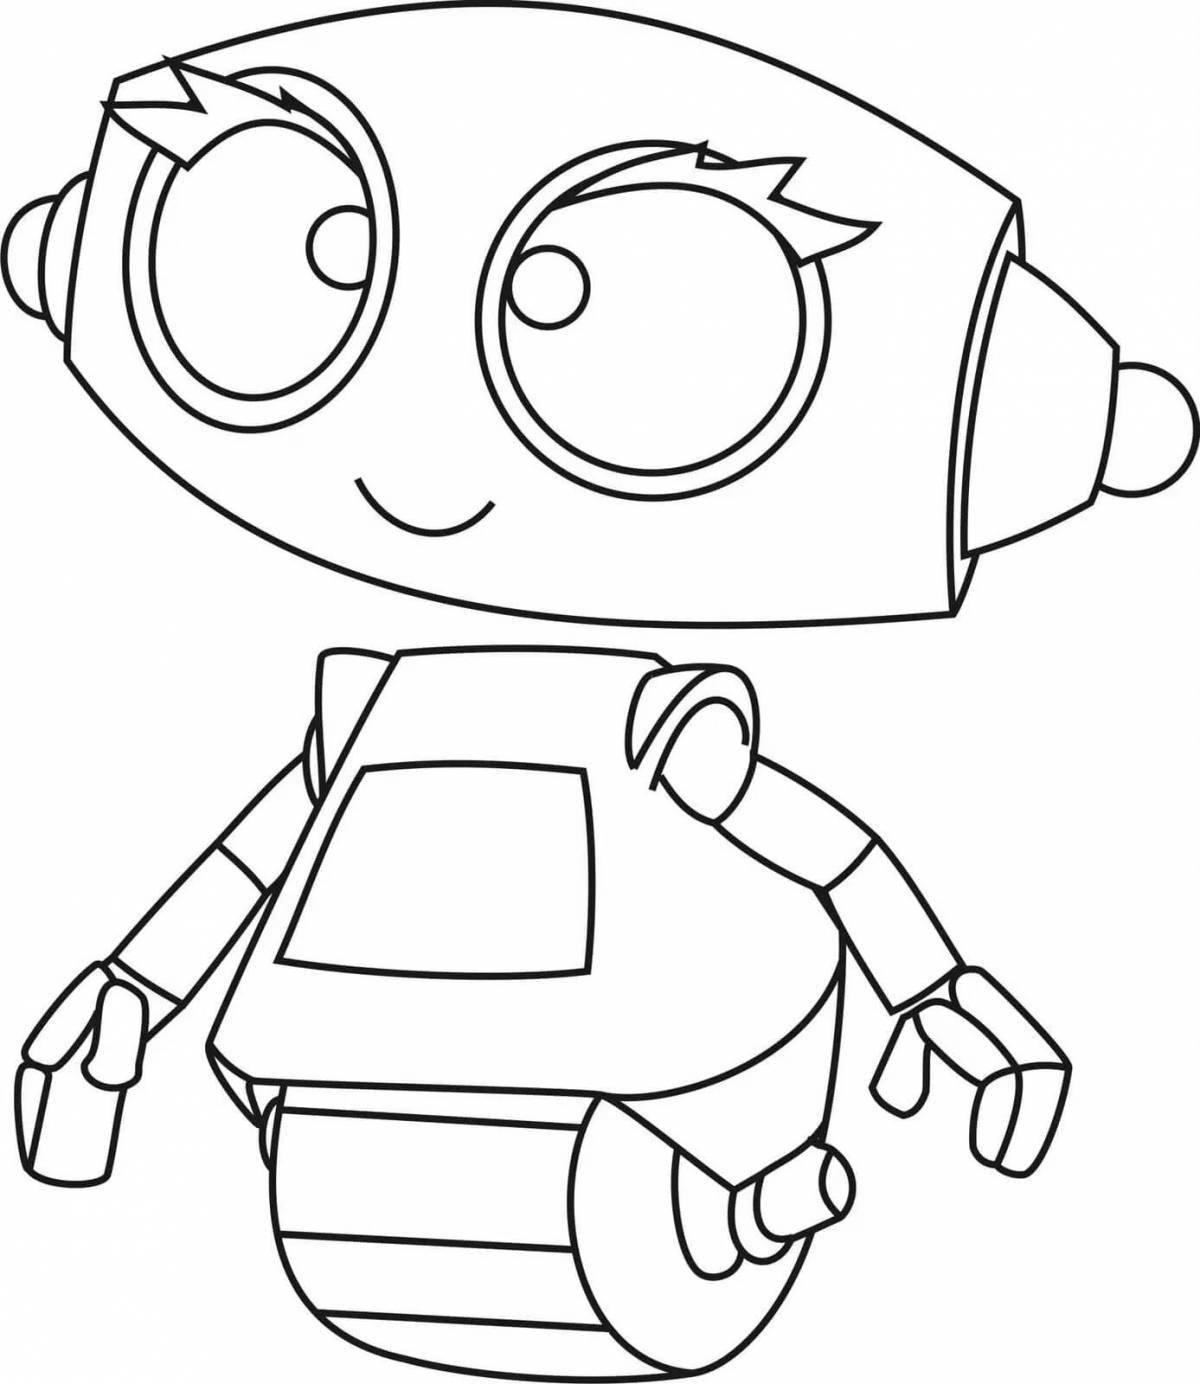 Fun tobot coloring pages for kids